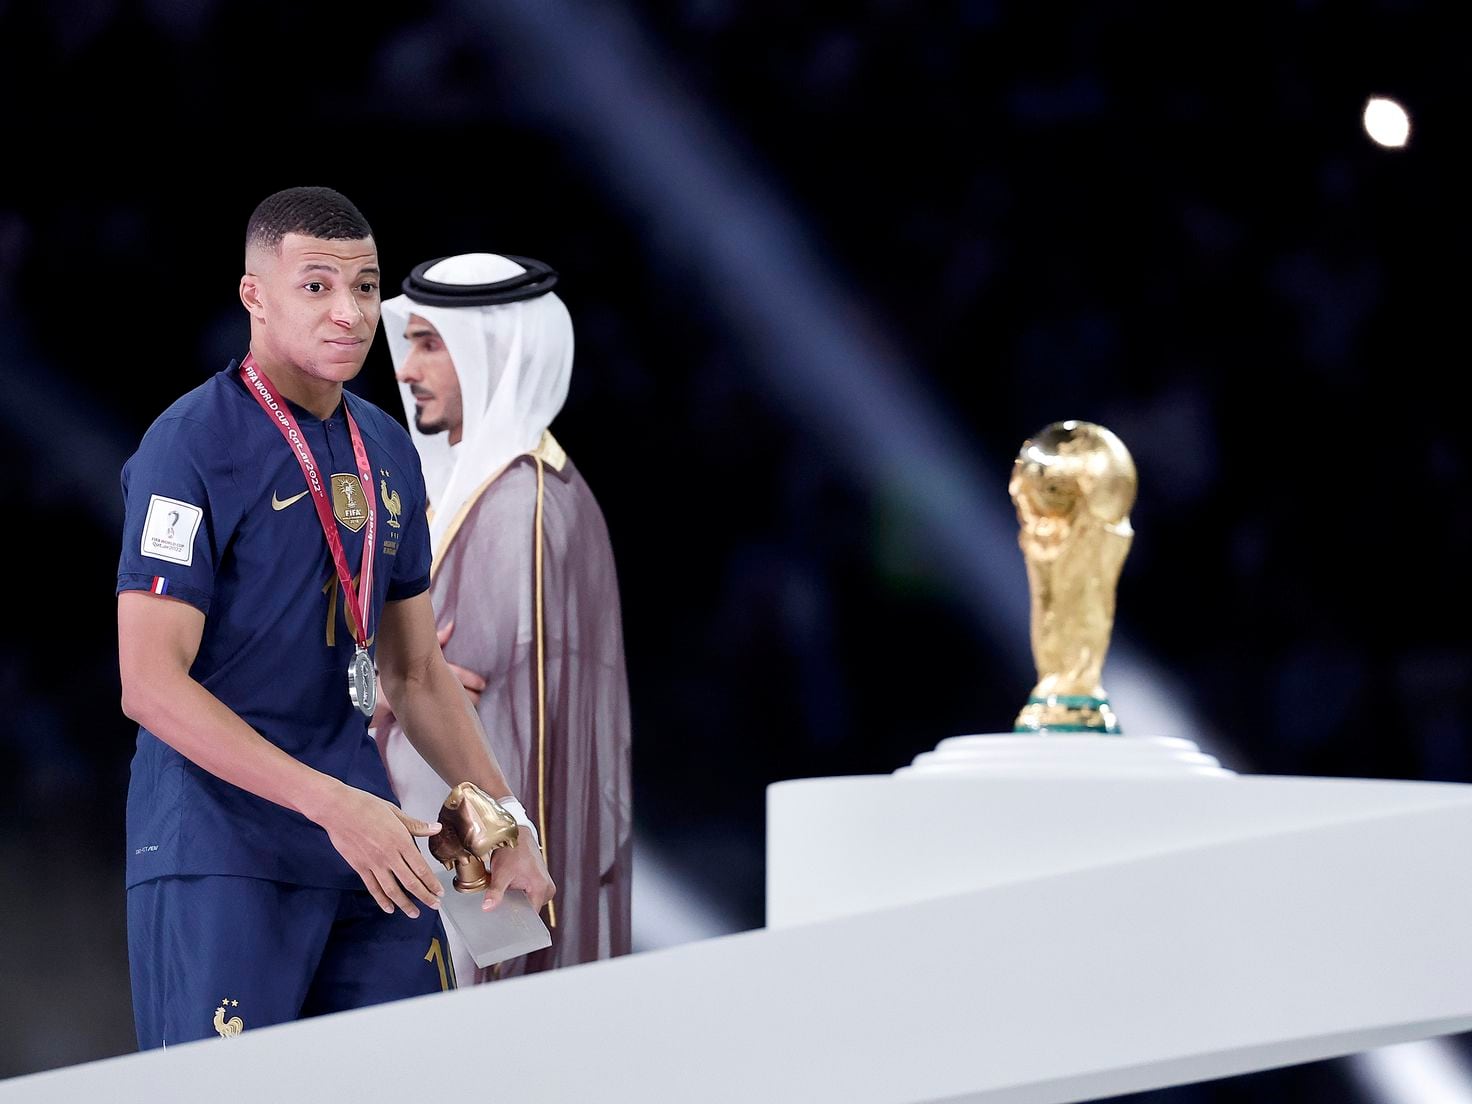 FULL LIST: Mbappe And Other Award Winners At 2022 World Cup